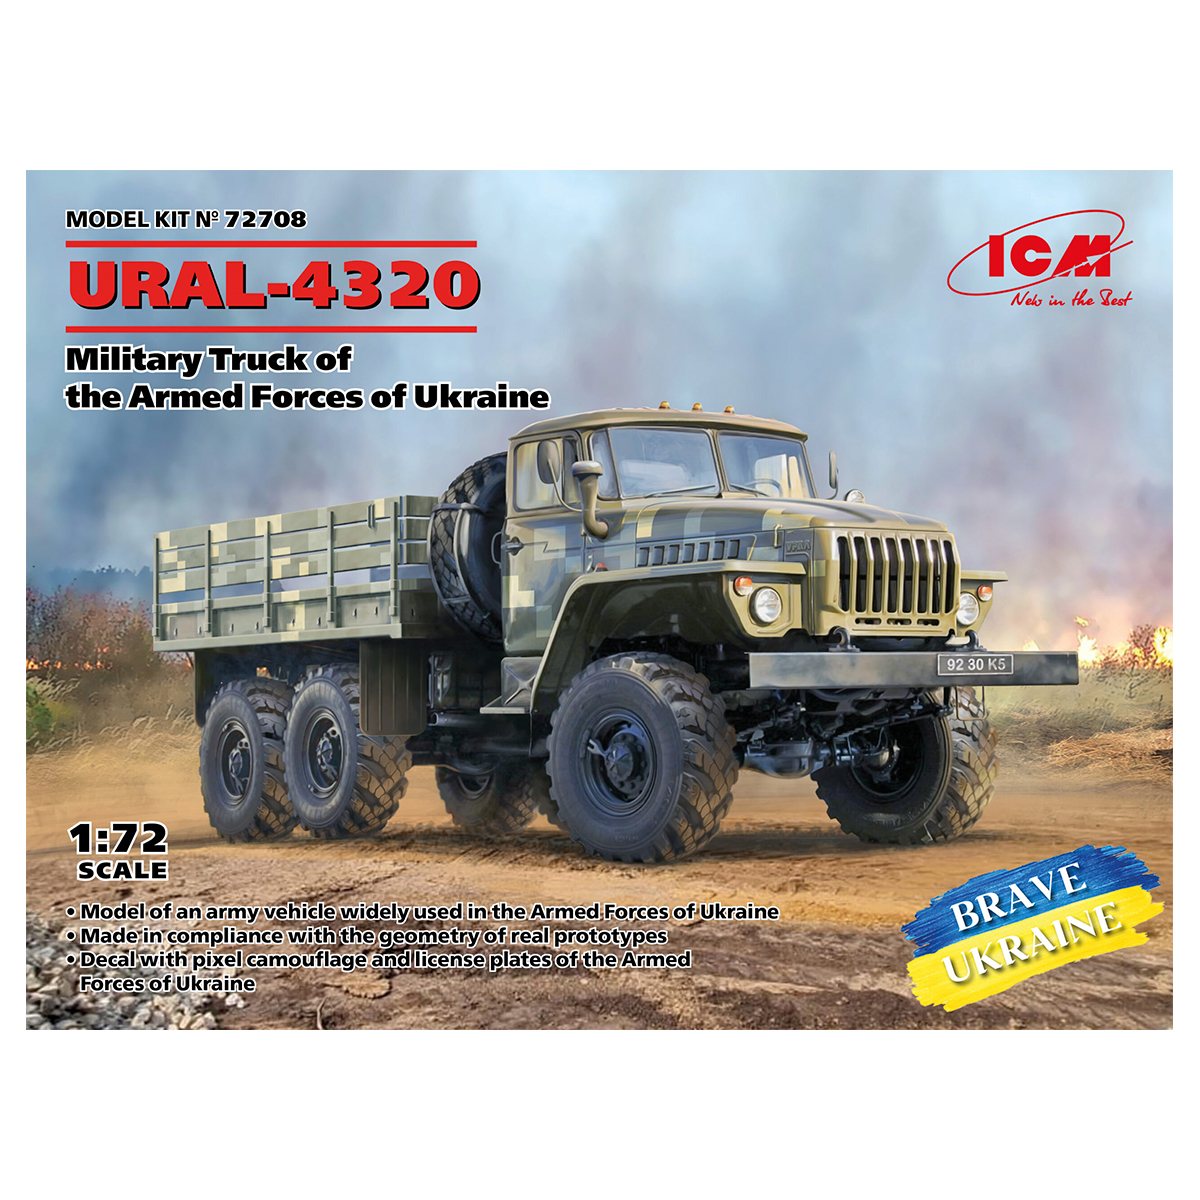 URAL-4320, Military Truck of the Armed Forces of Ukraine 1/72